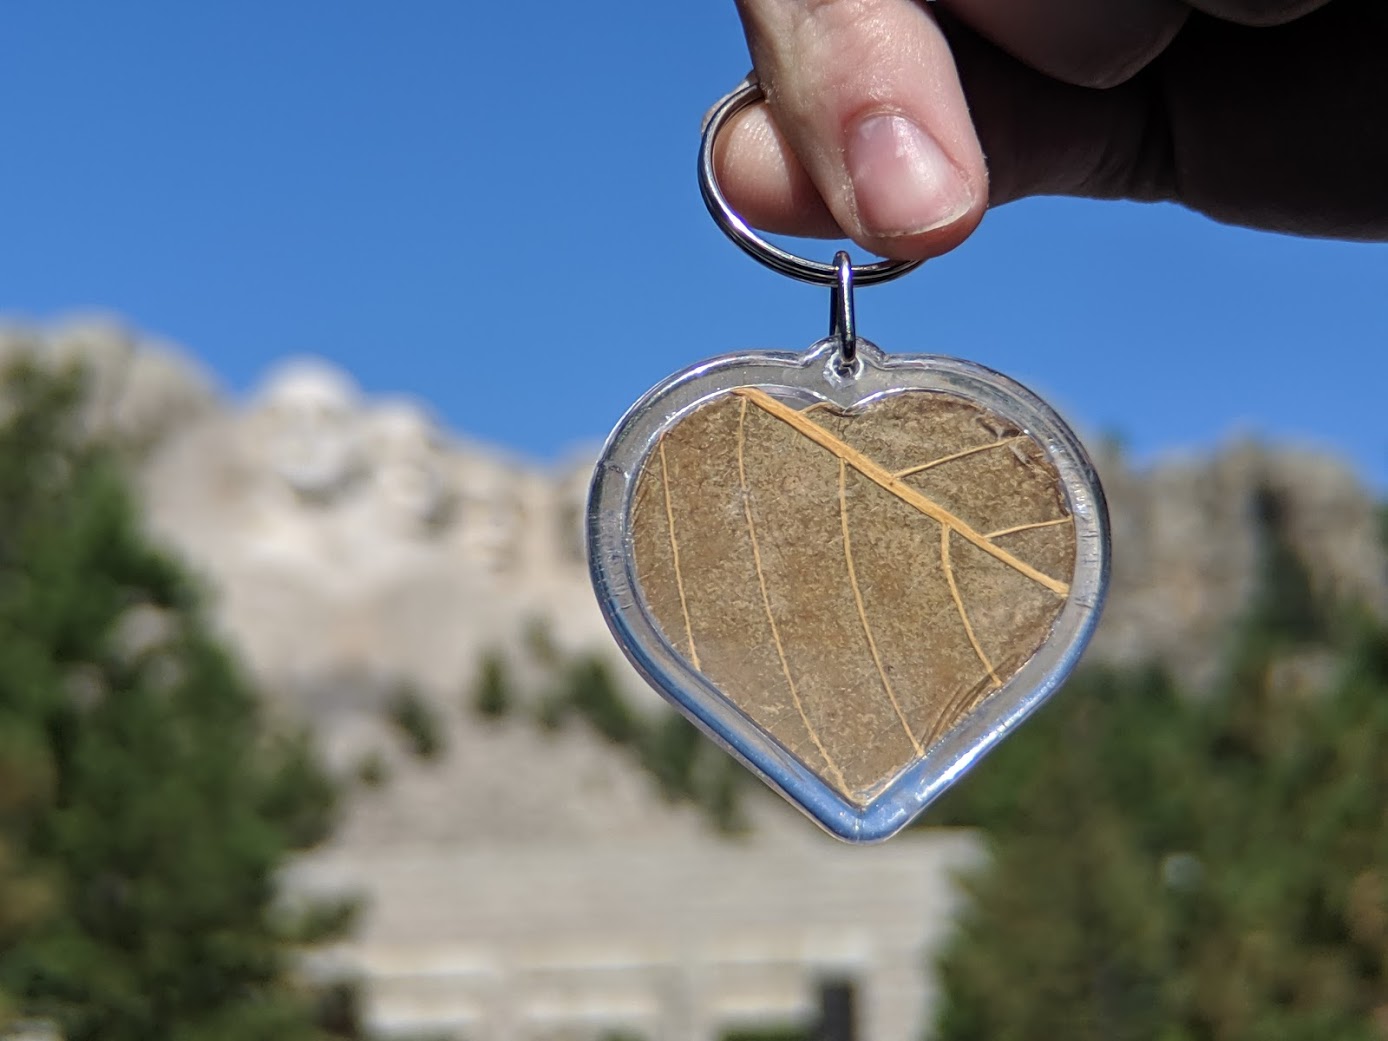 kratom heart keychain in front of Mount Rushmore